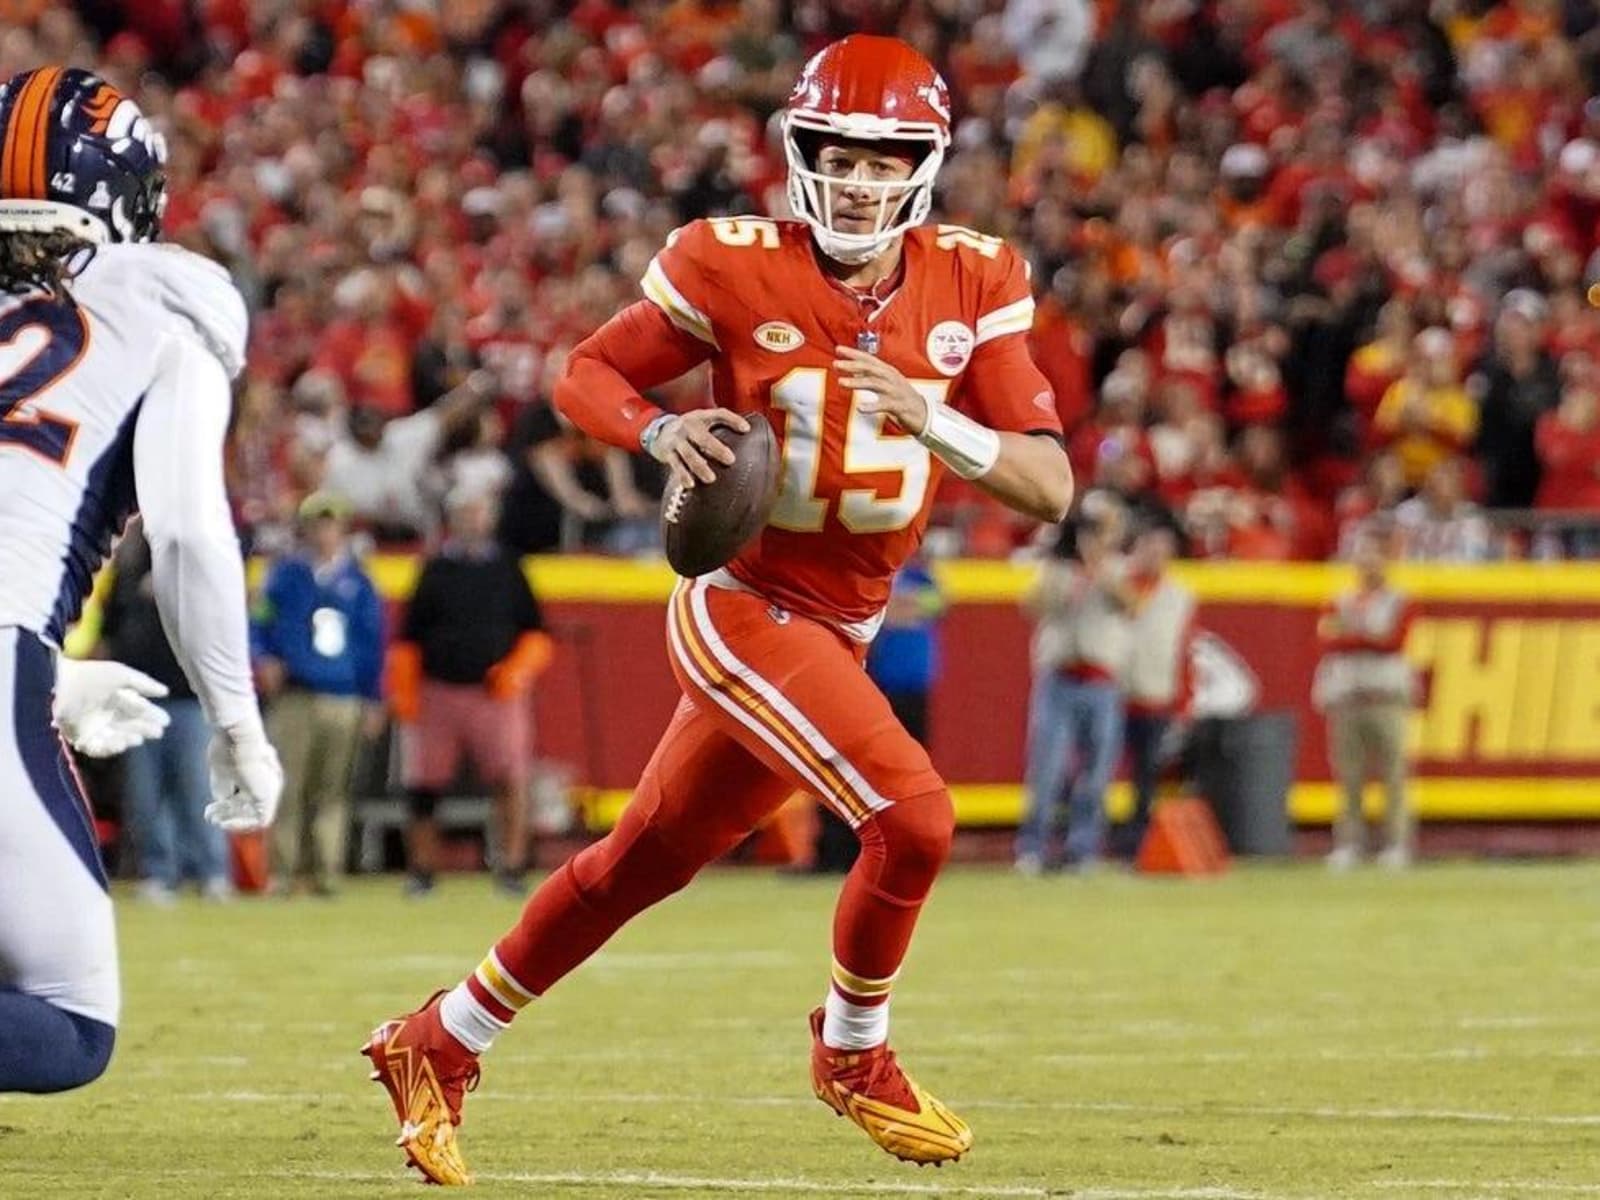 Chiefs beat Browns late with two touchdowns in 3:06